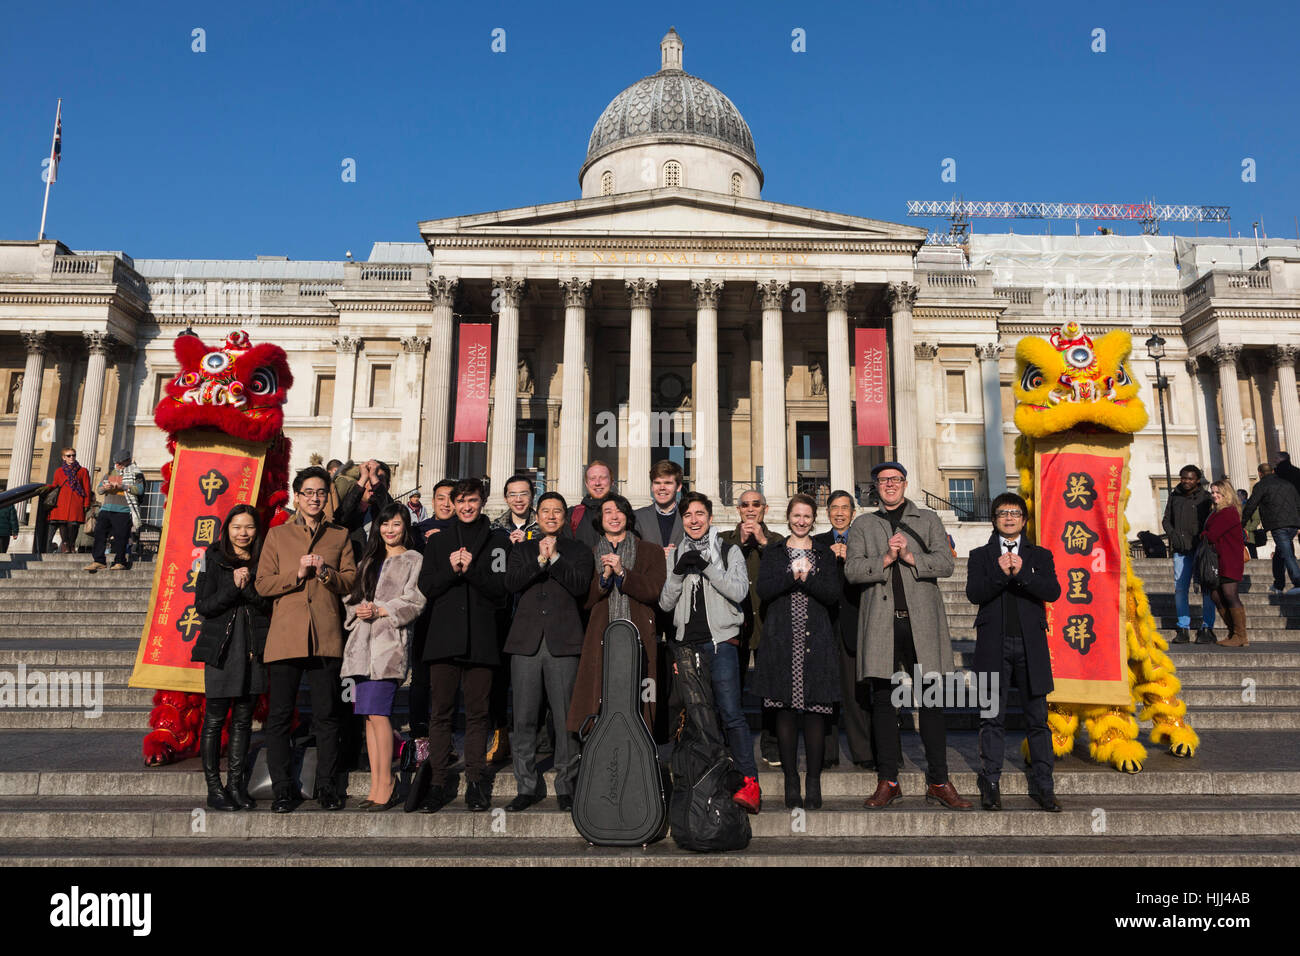 Performers pose with Lion Dancers from Chinatown on the steps of Trafalgar Square in front of the National Gallery ahead of this weekend's 'Year of the Rooster' Chinese New Year celebrations in London, UK. Stock Photo